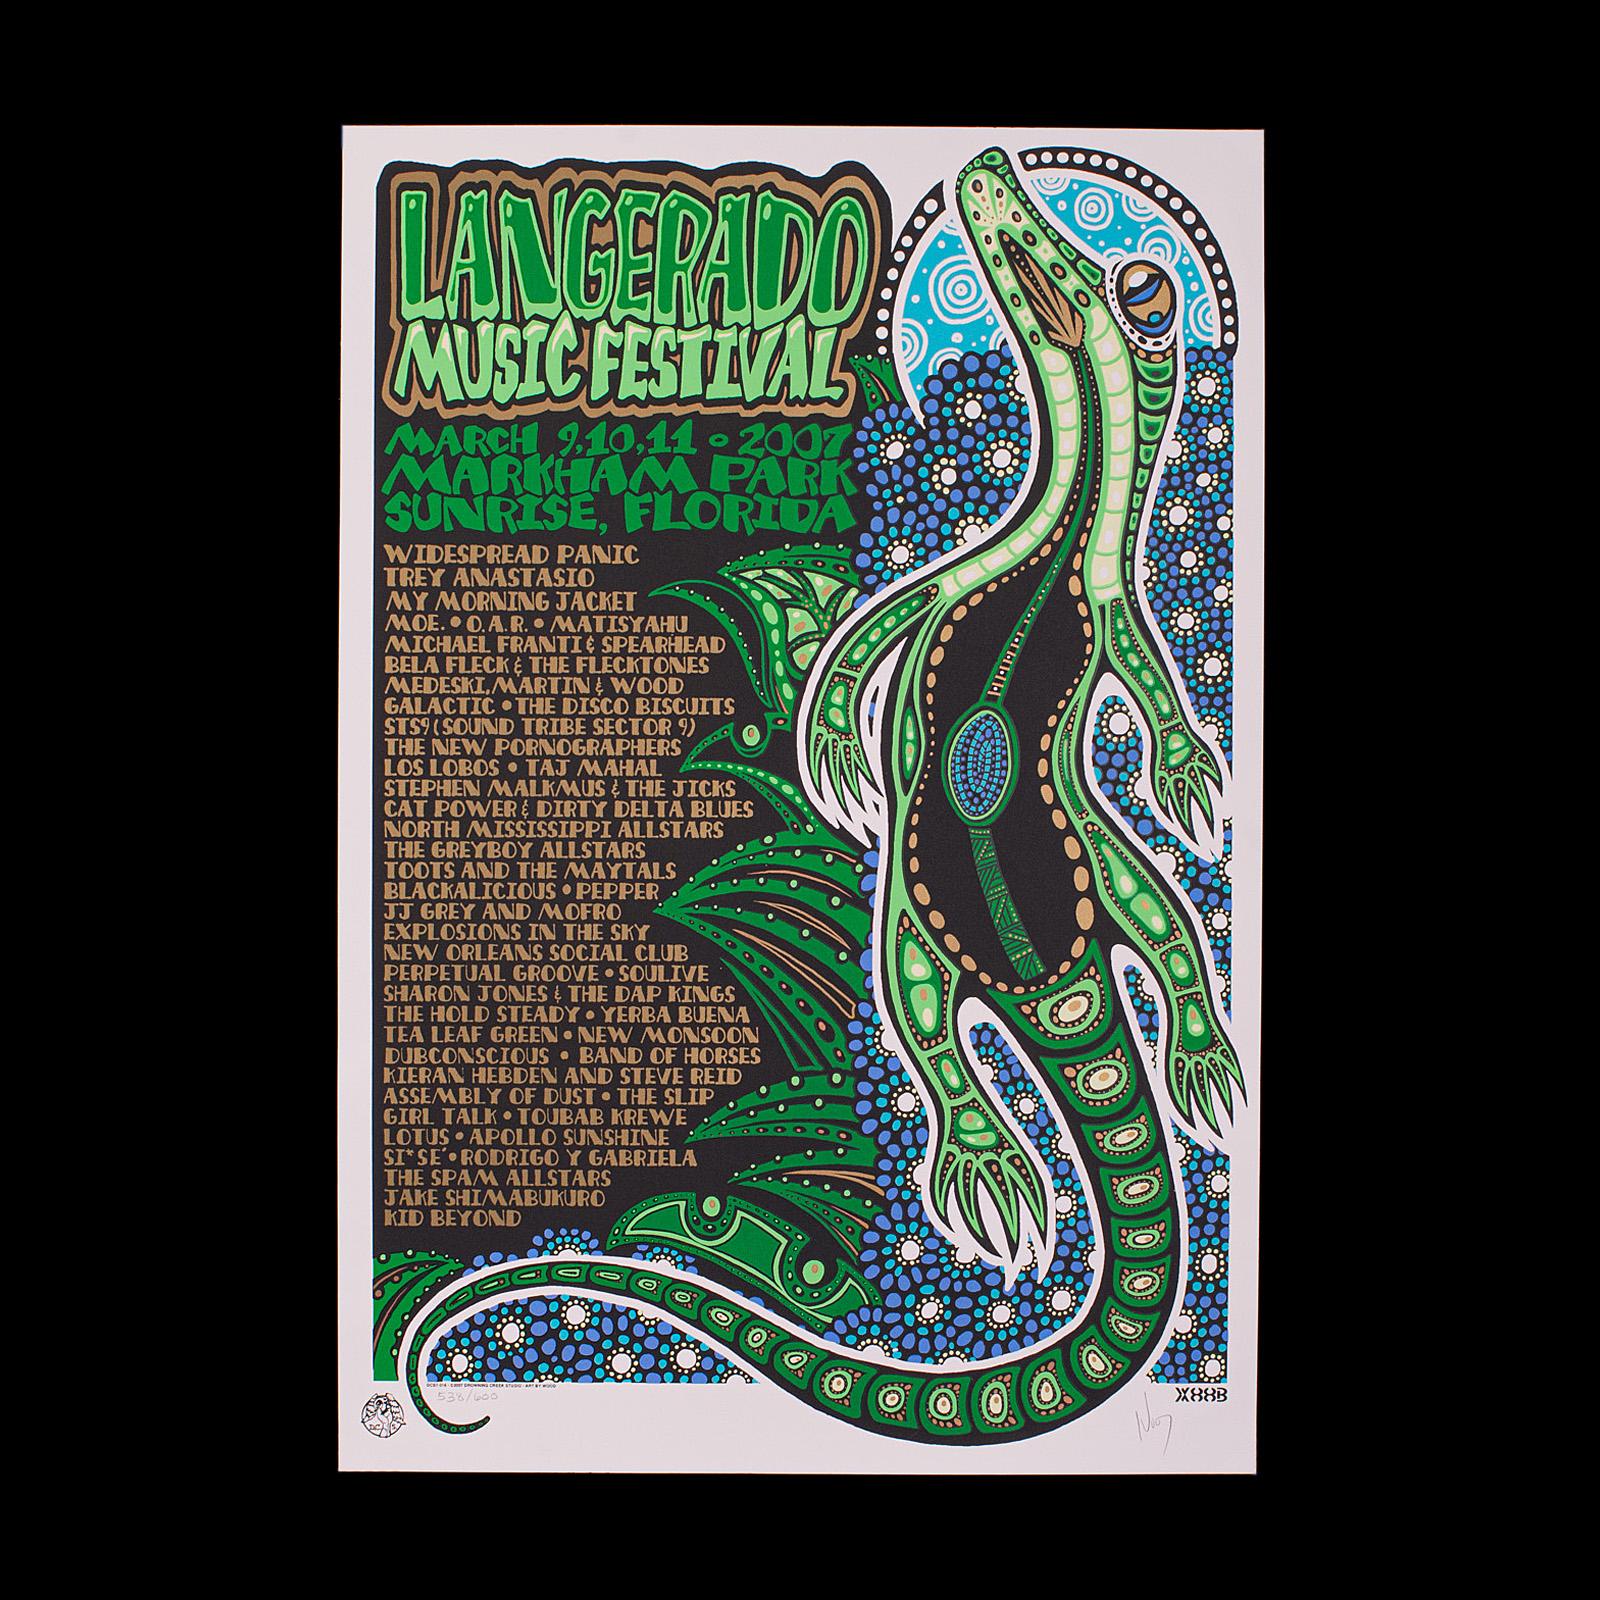 This is a decorative art poster. An American, screenprinted festival print signed by the artist, dated to 2007.

Delightfully decorative festival poster with copious detail
In superb gallery exhibition quality and good original order
Vibrant